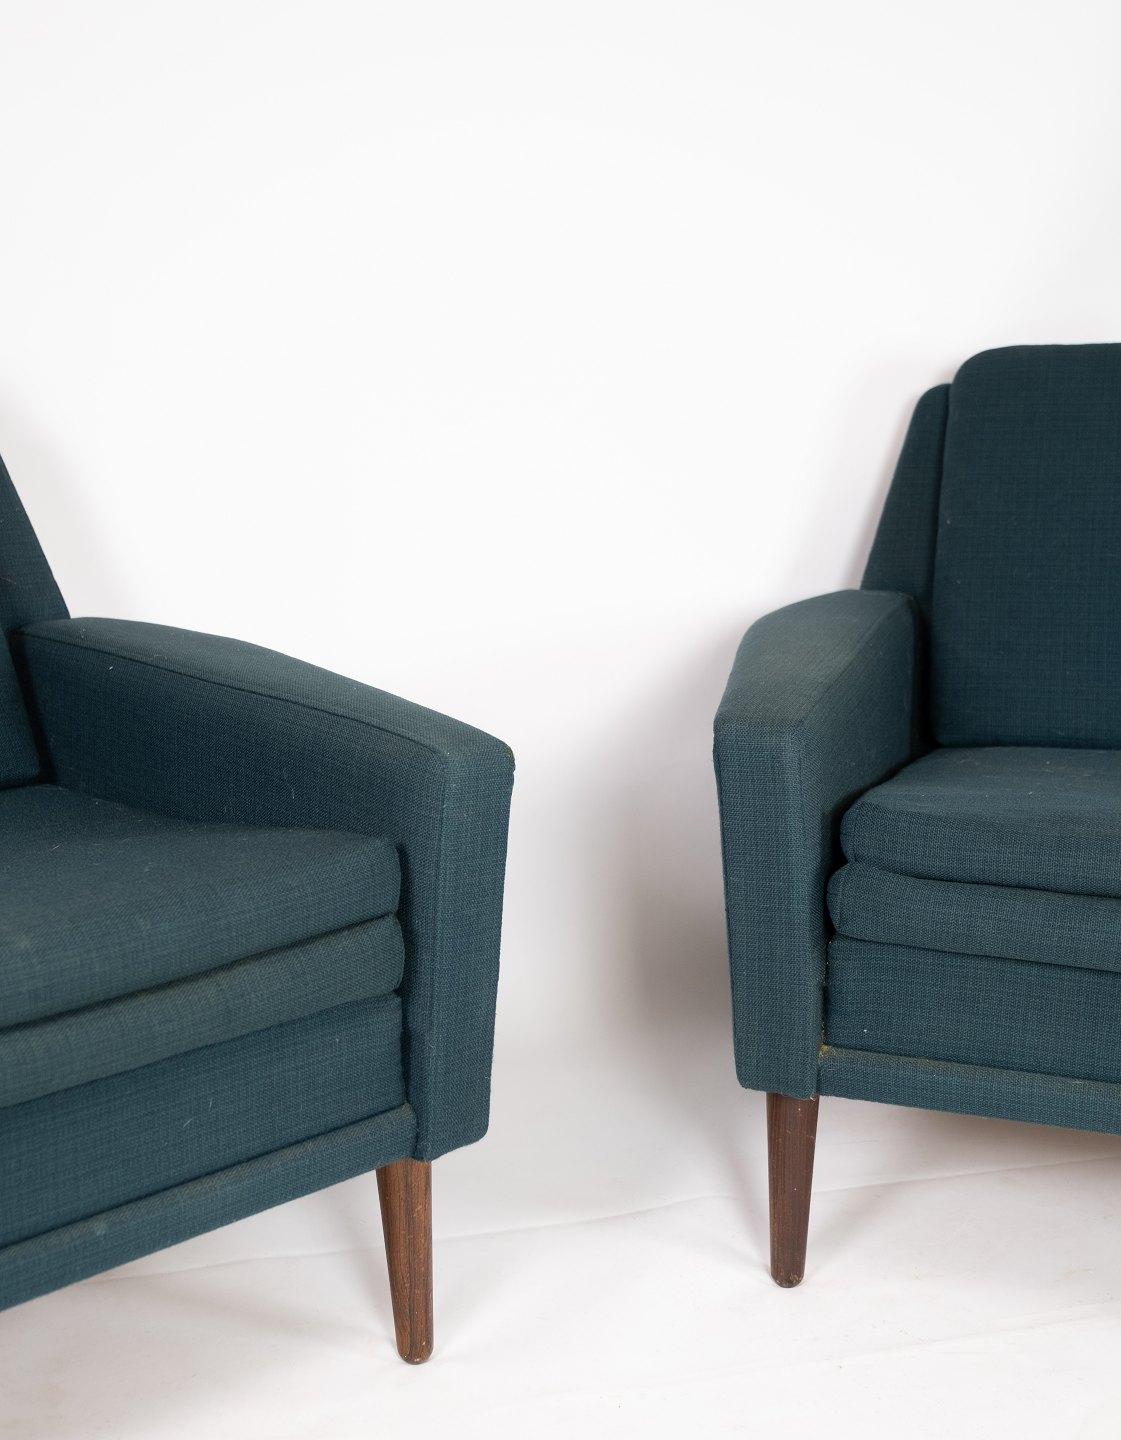 Danish Set of Armchairs by Fritz Hansen from the 1960s For Sale